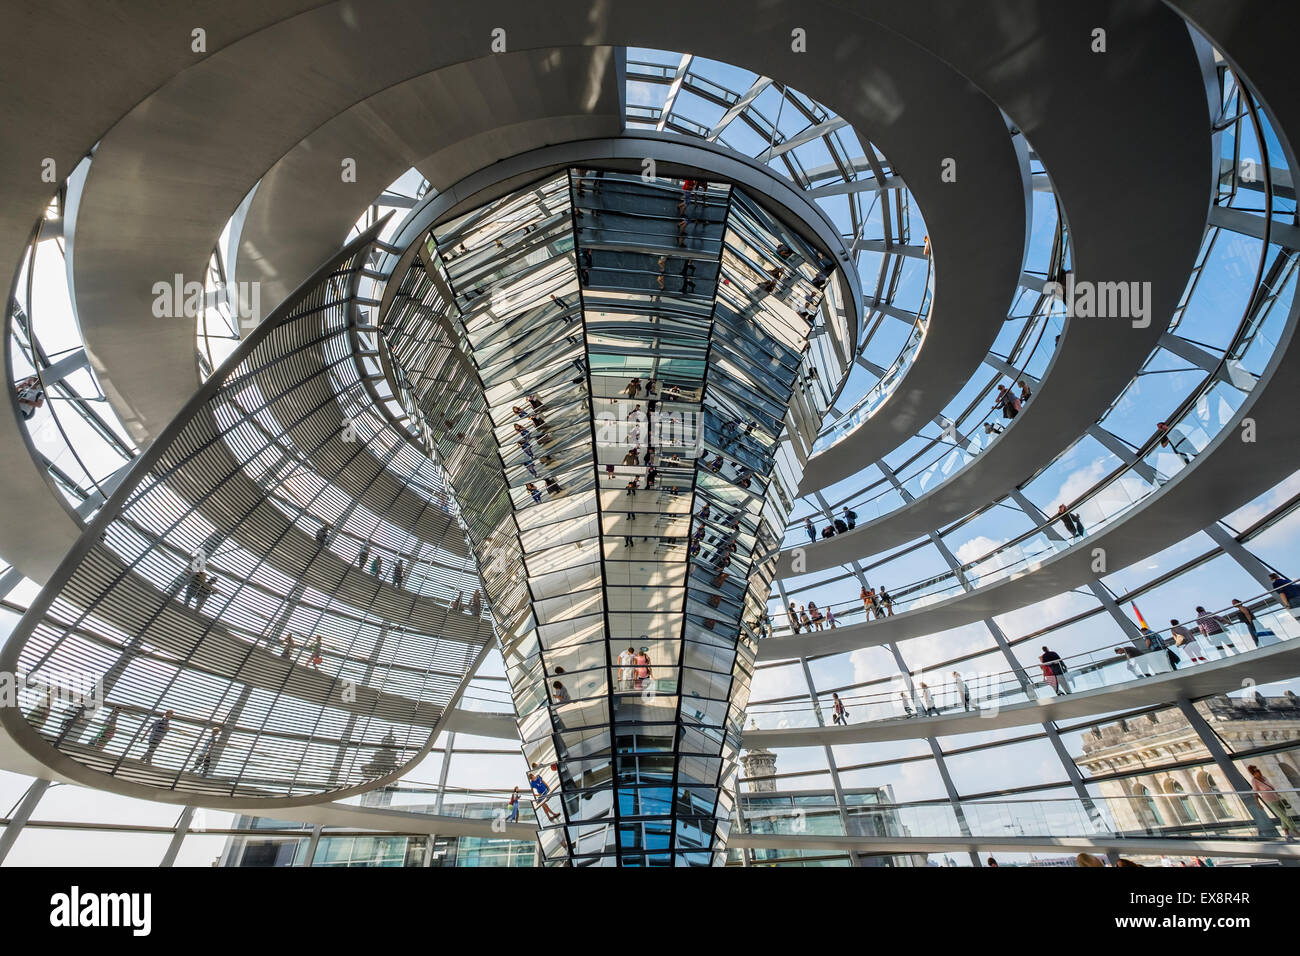 The glass dome above the Reichstag parliament building in Berlin Germany Stock Photo